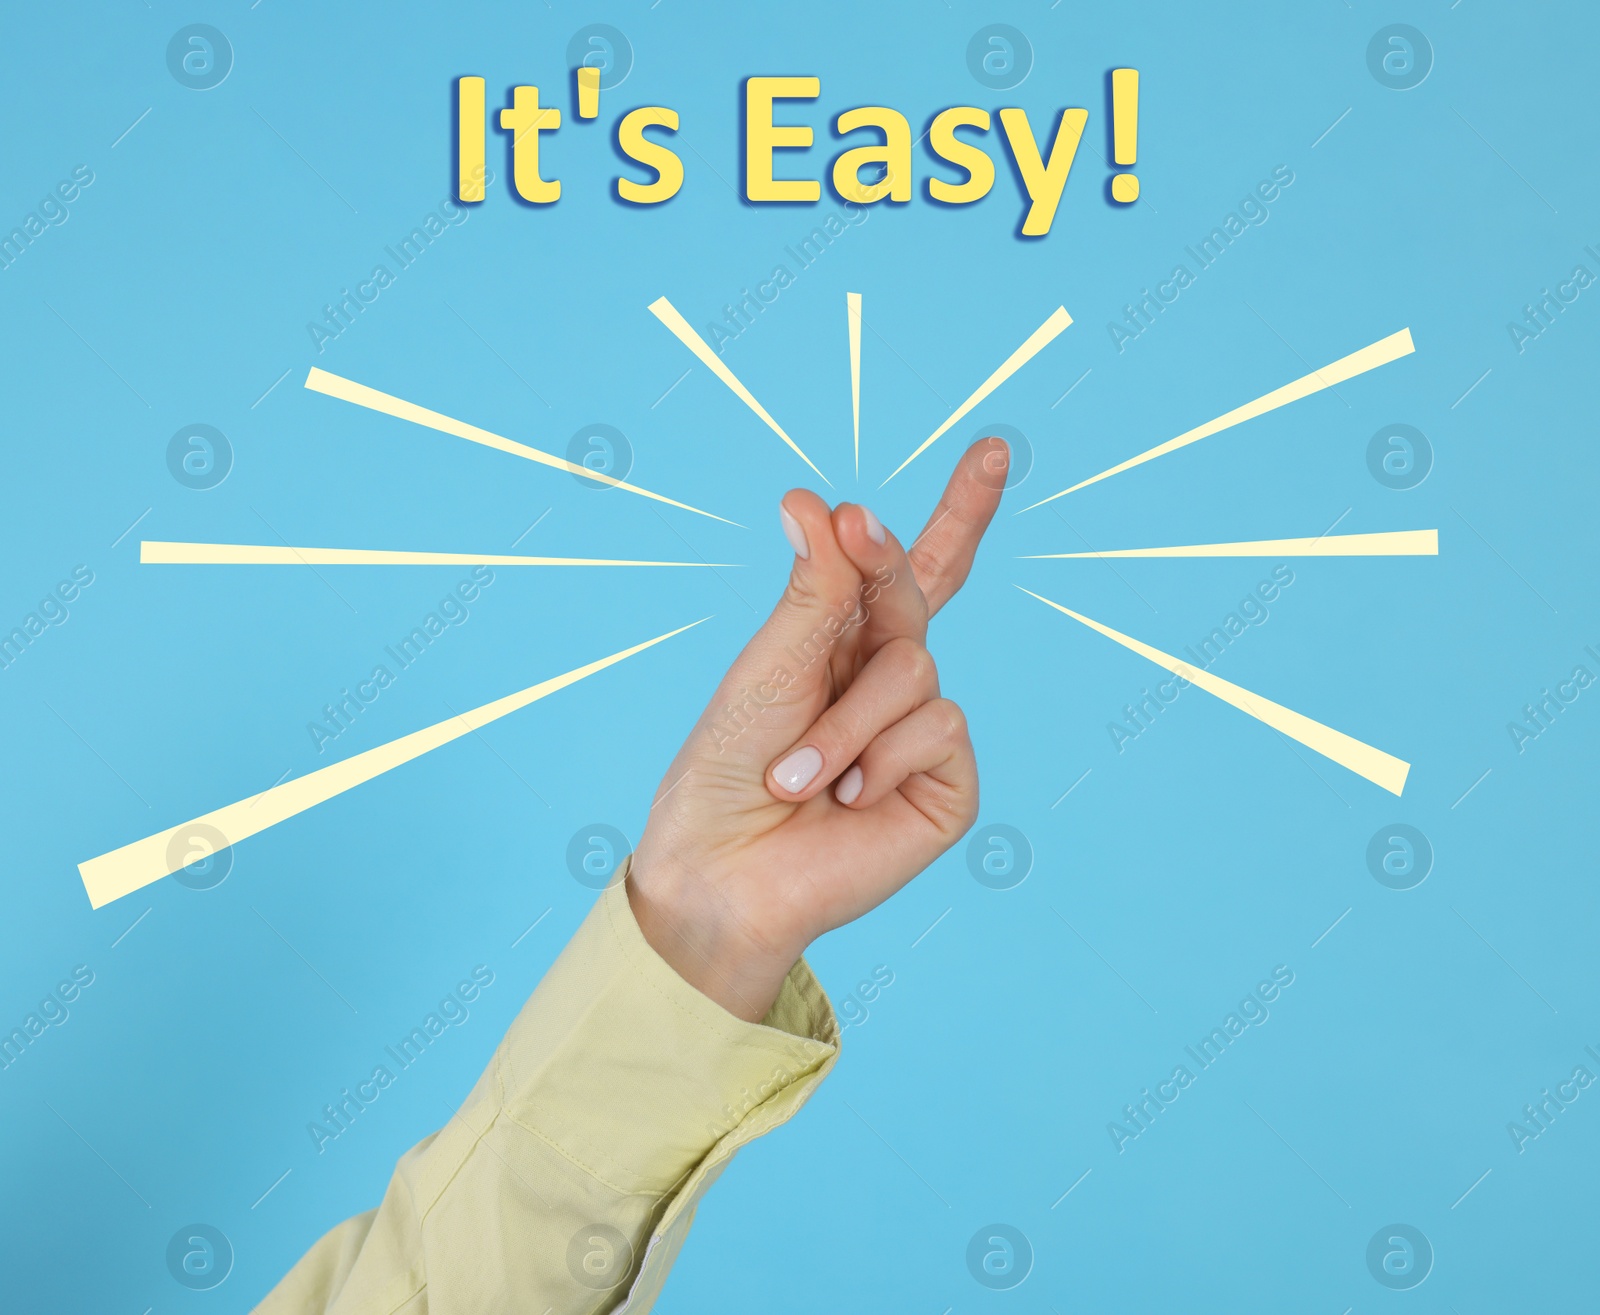 Image of Phrase It's Easy and woman snapping fingers on light blue background, closeup